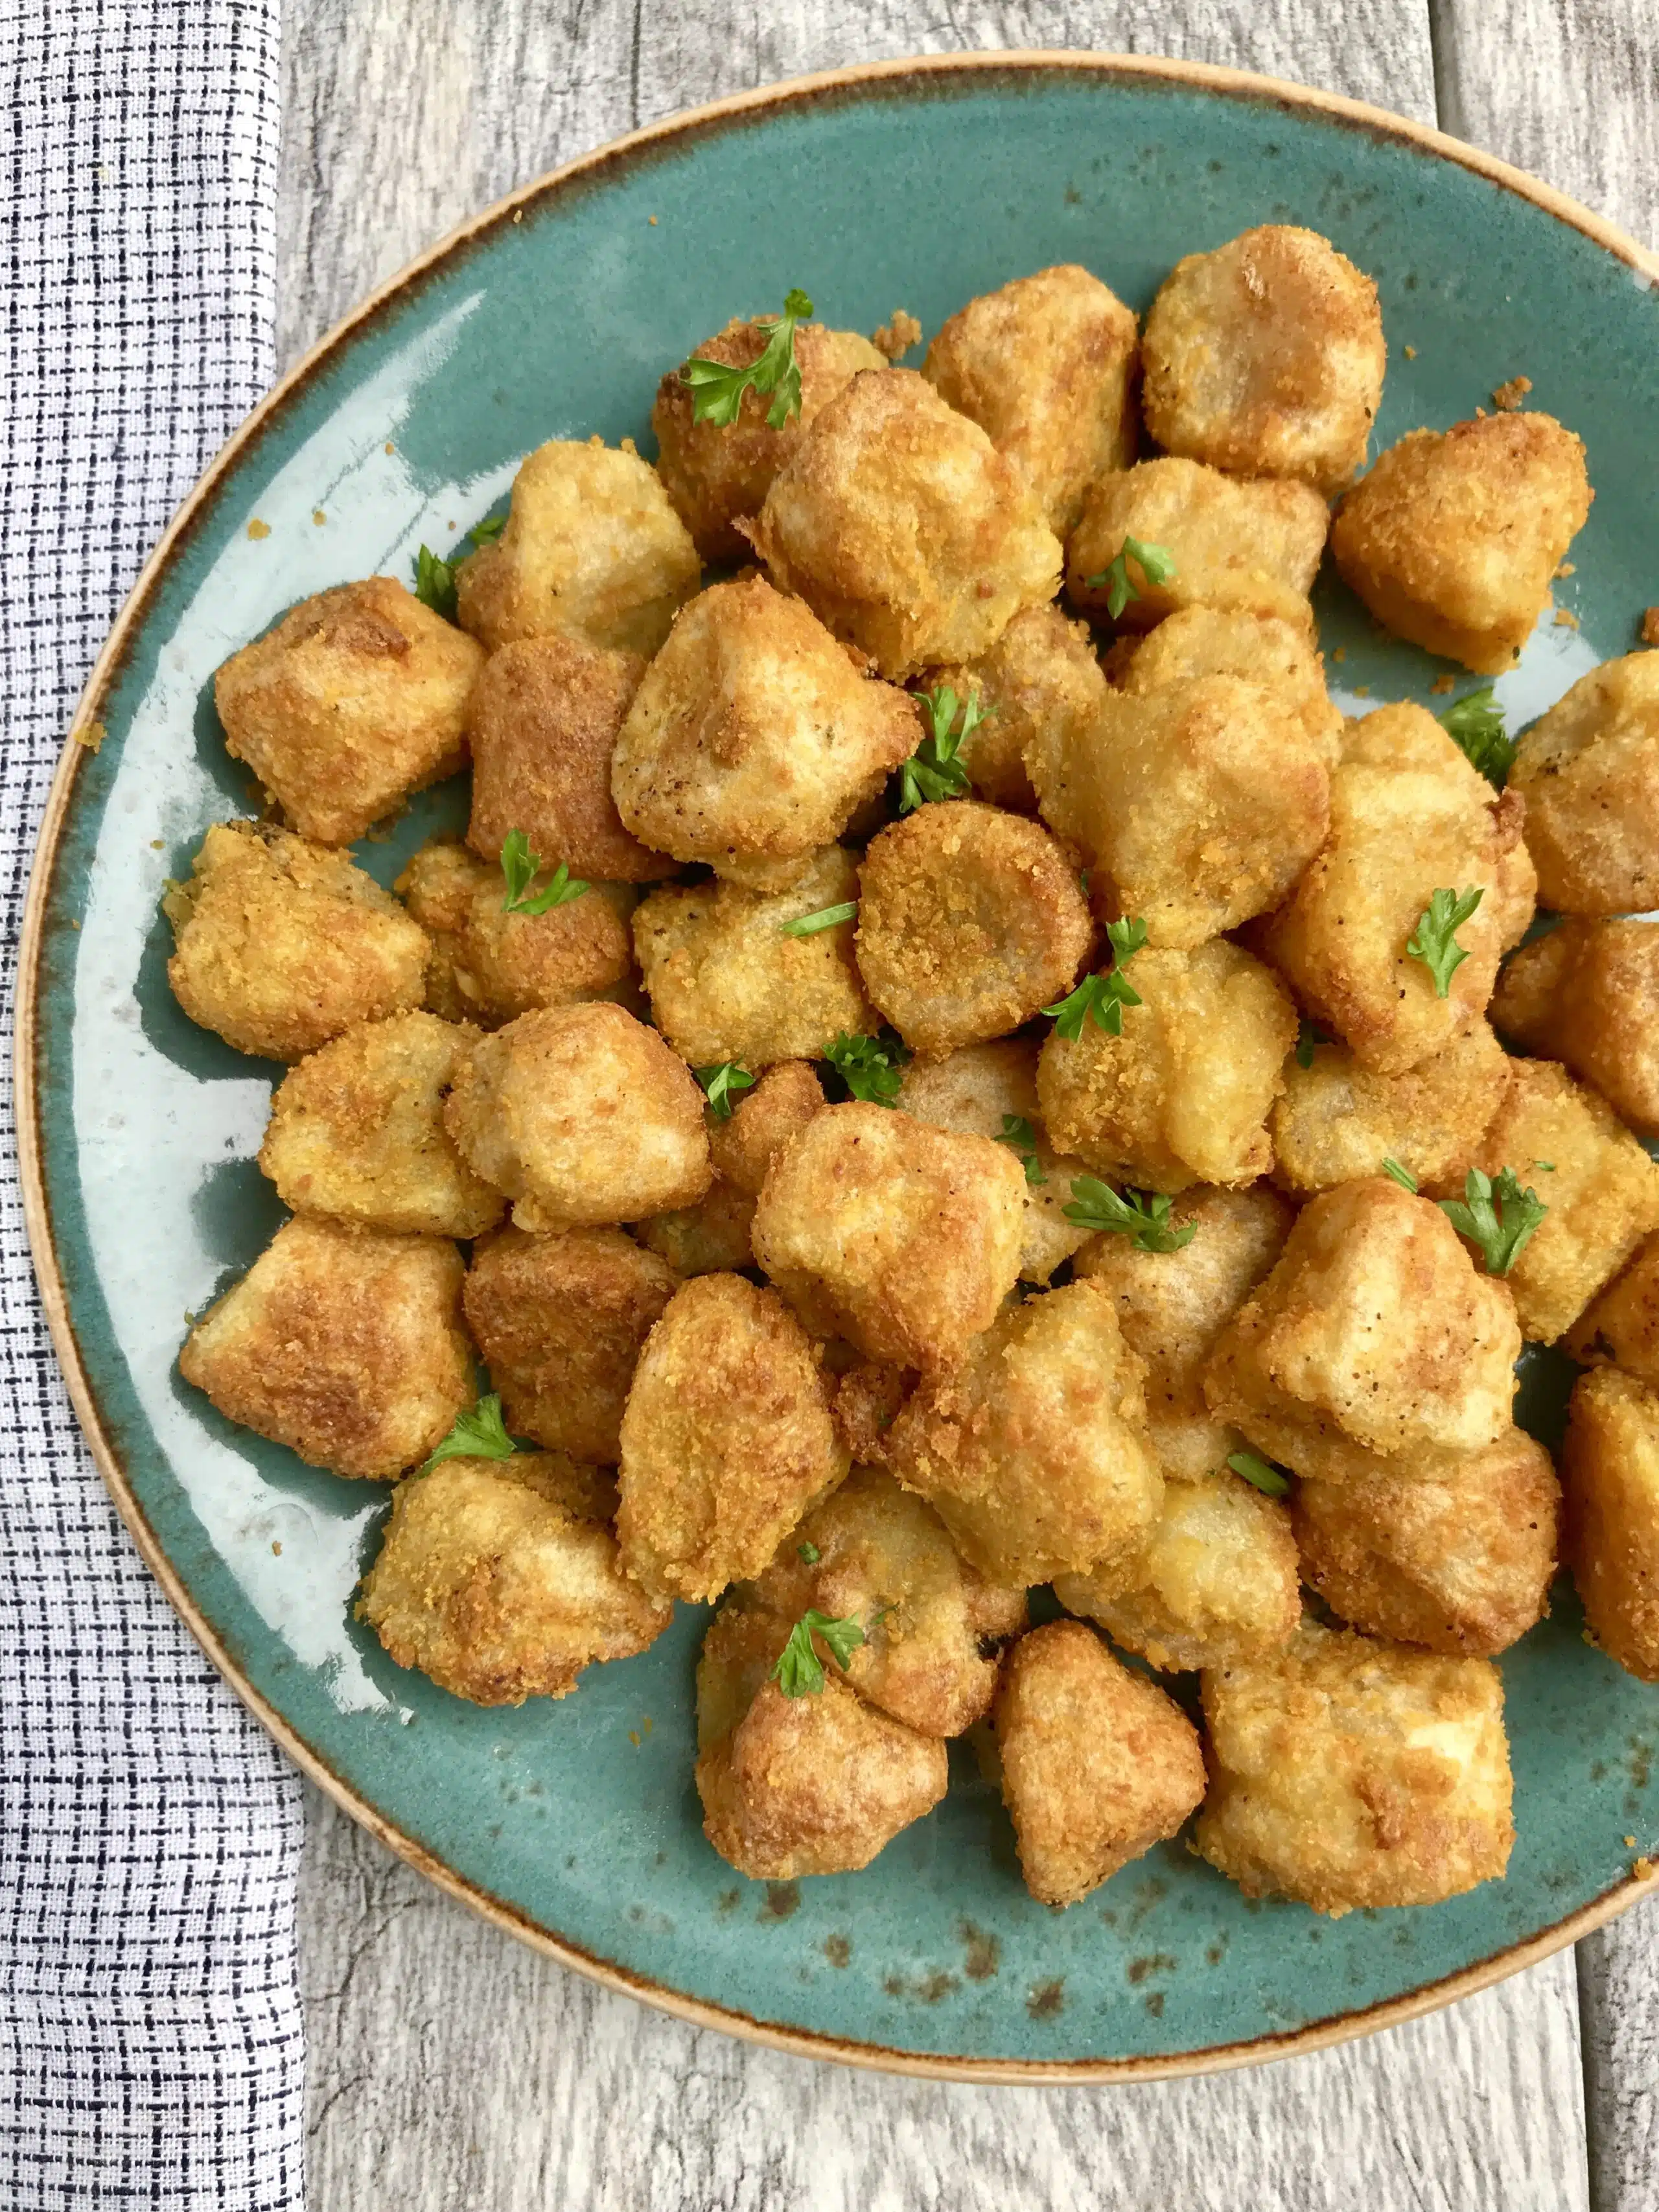 This crispy & "cheesy" vegan cauliflower gnocchi recipe, made with just 4 ingredients in an air fryer, is an easy and delicious way to prepare Trader Joe's infamous cauliflower gnocchi. Gluten-free, dairy-free, and vegan.